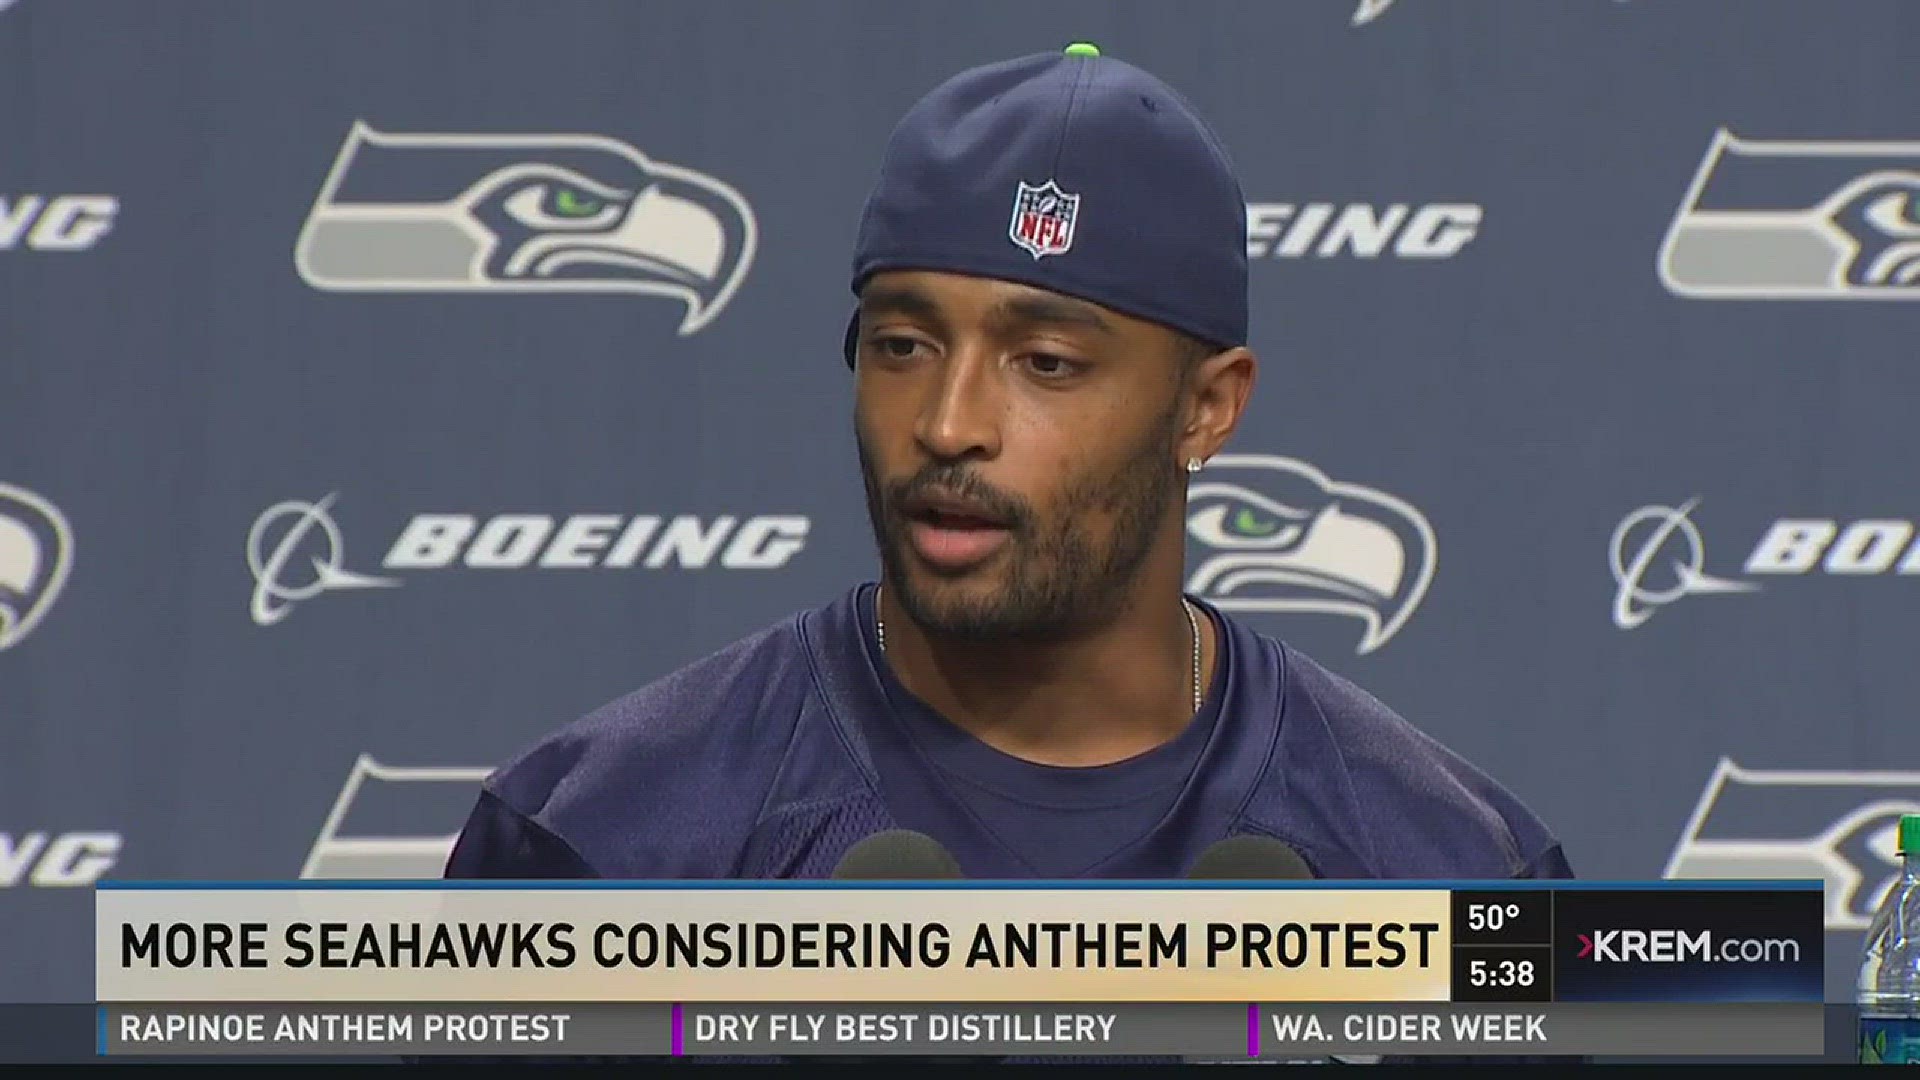 More Seahawks considering anthem protest